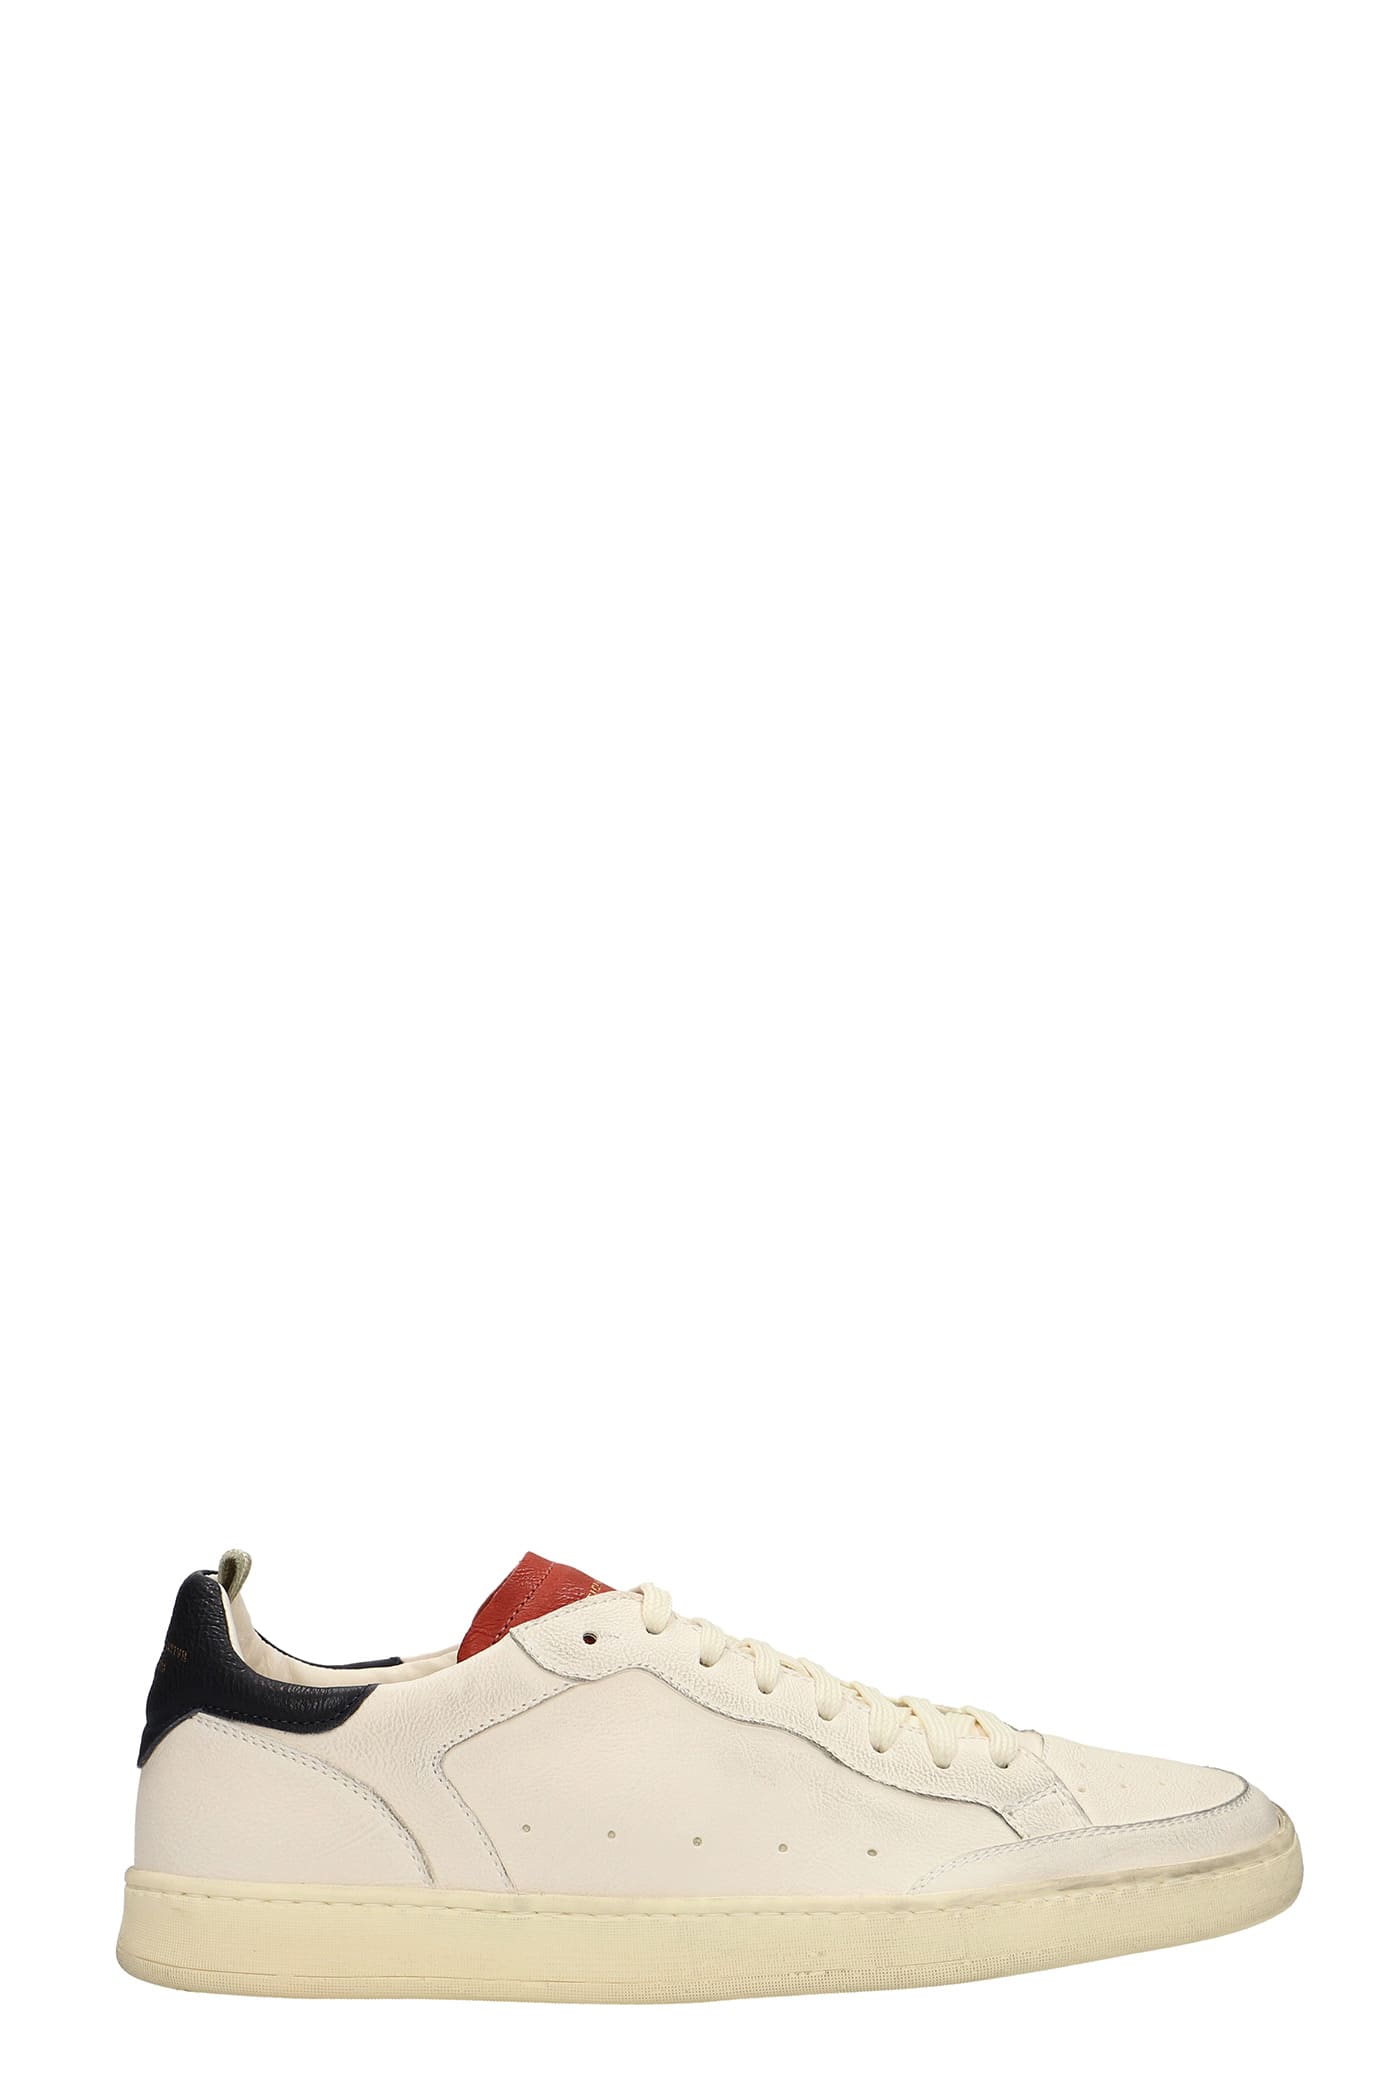 Officine Creative Sneakers In White Leather